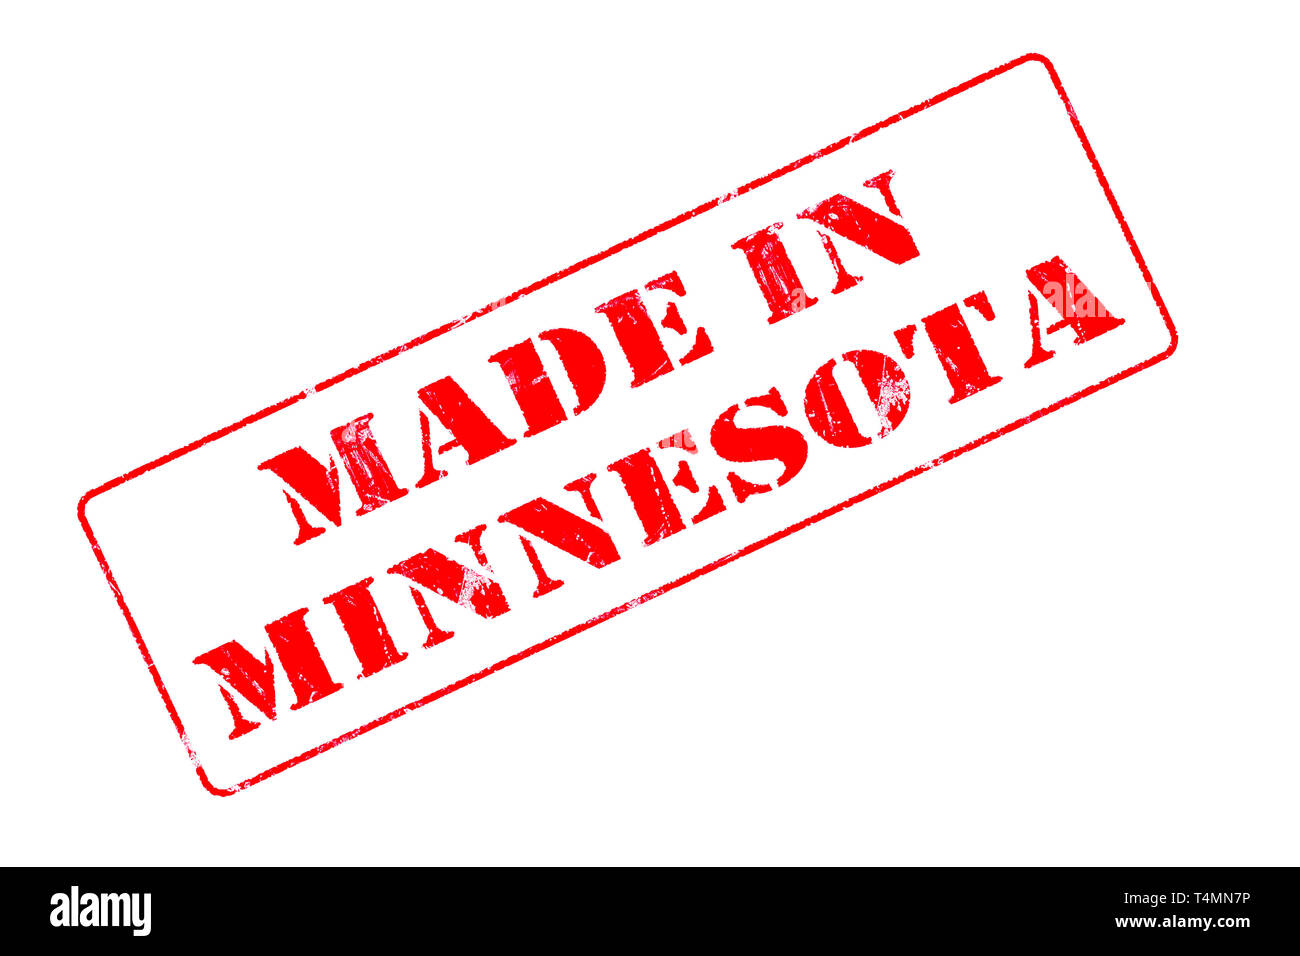 Rubber stamp concept showing a red stamp reading Made in Minnesota Stock Photo